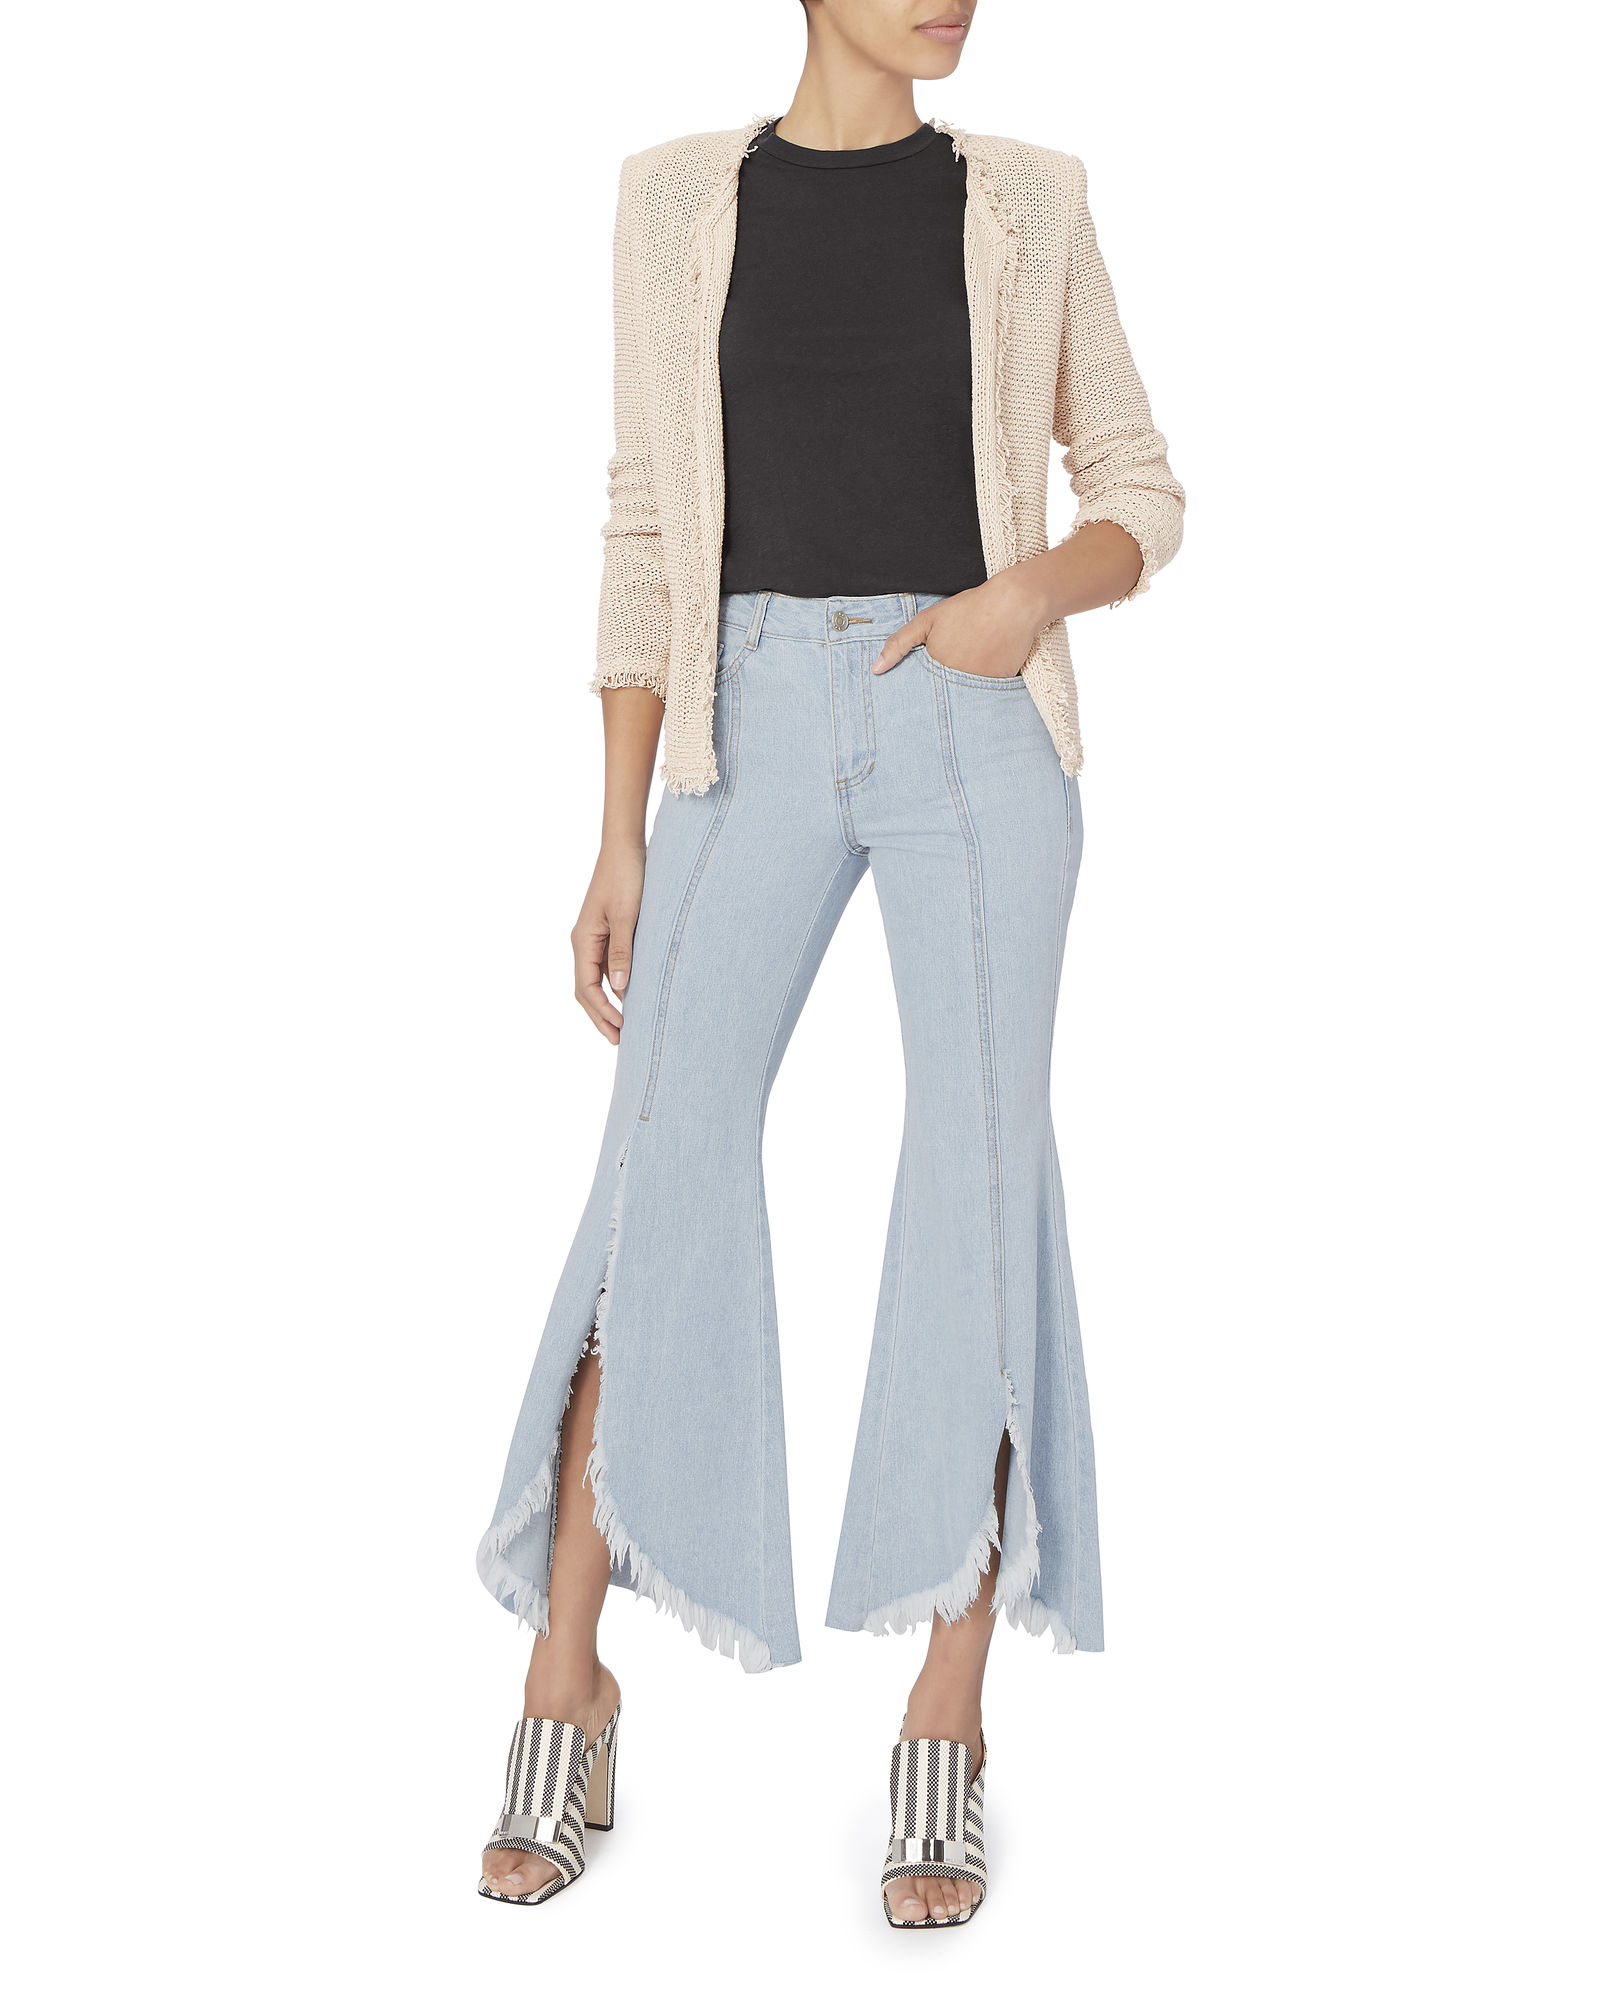 how to wear flared jeans outfit ideas